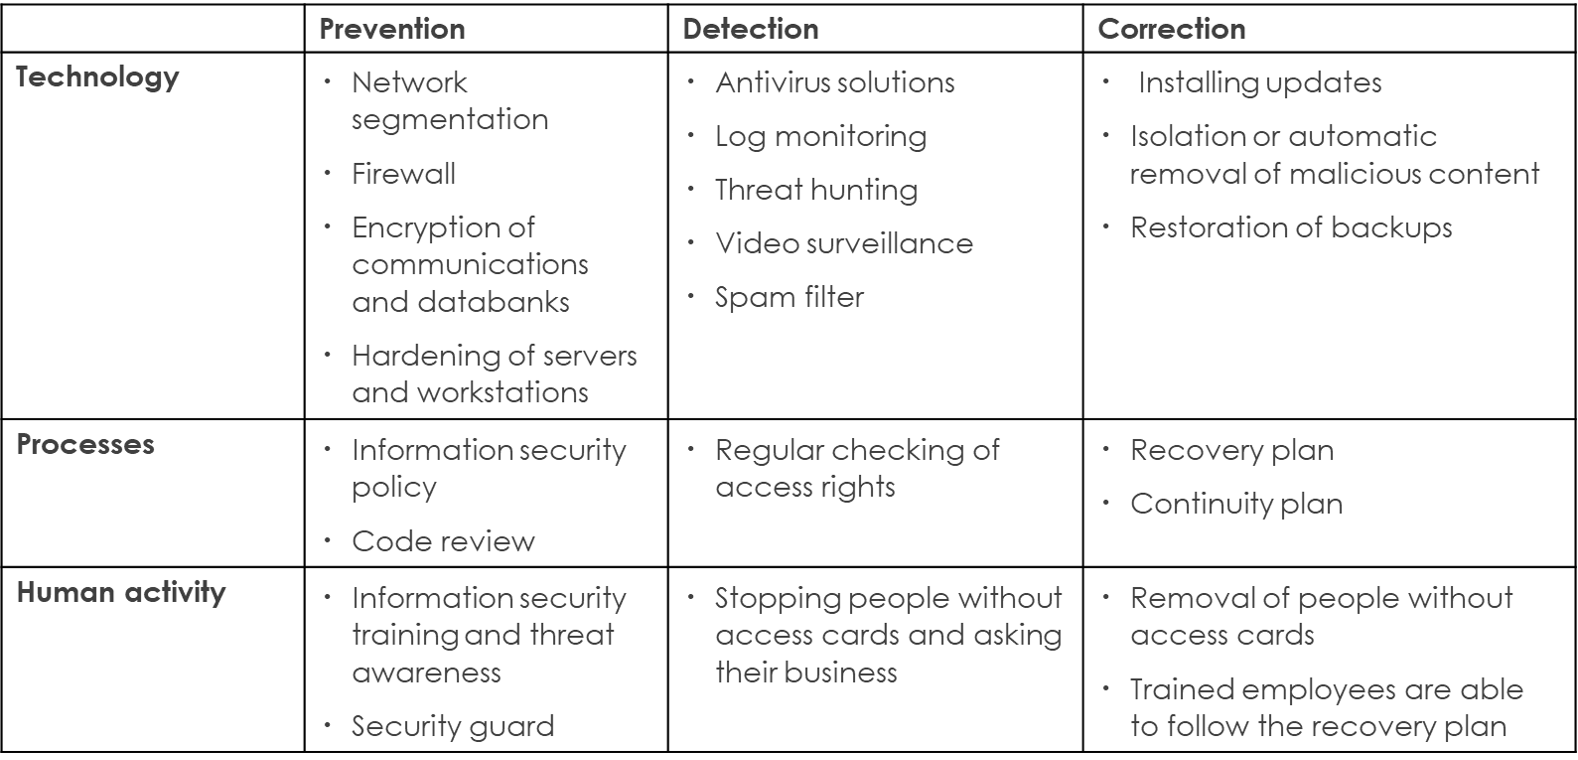 Examples of safeguards against information security threats